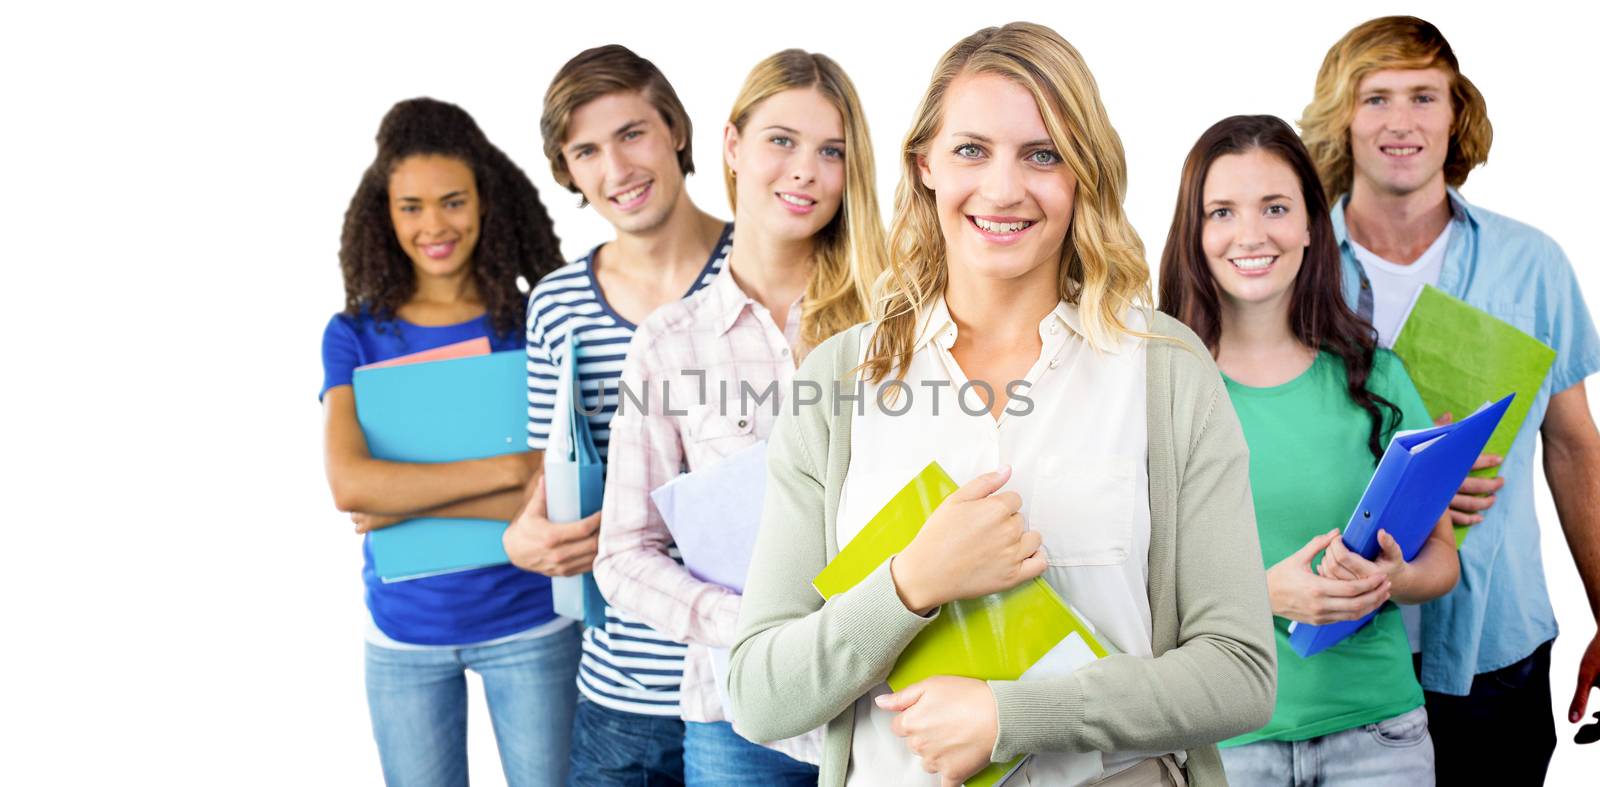 College students holding folders at college against white background with vignette